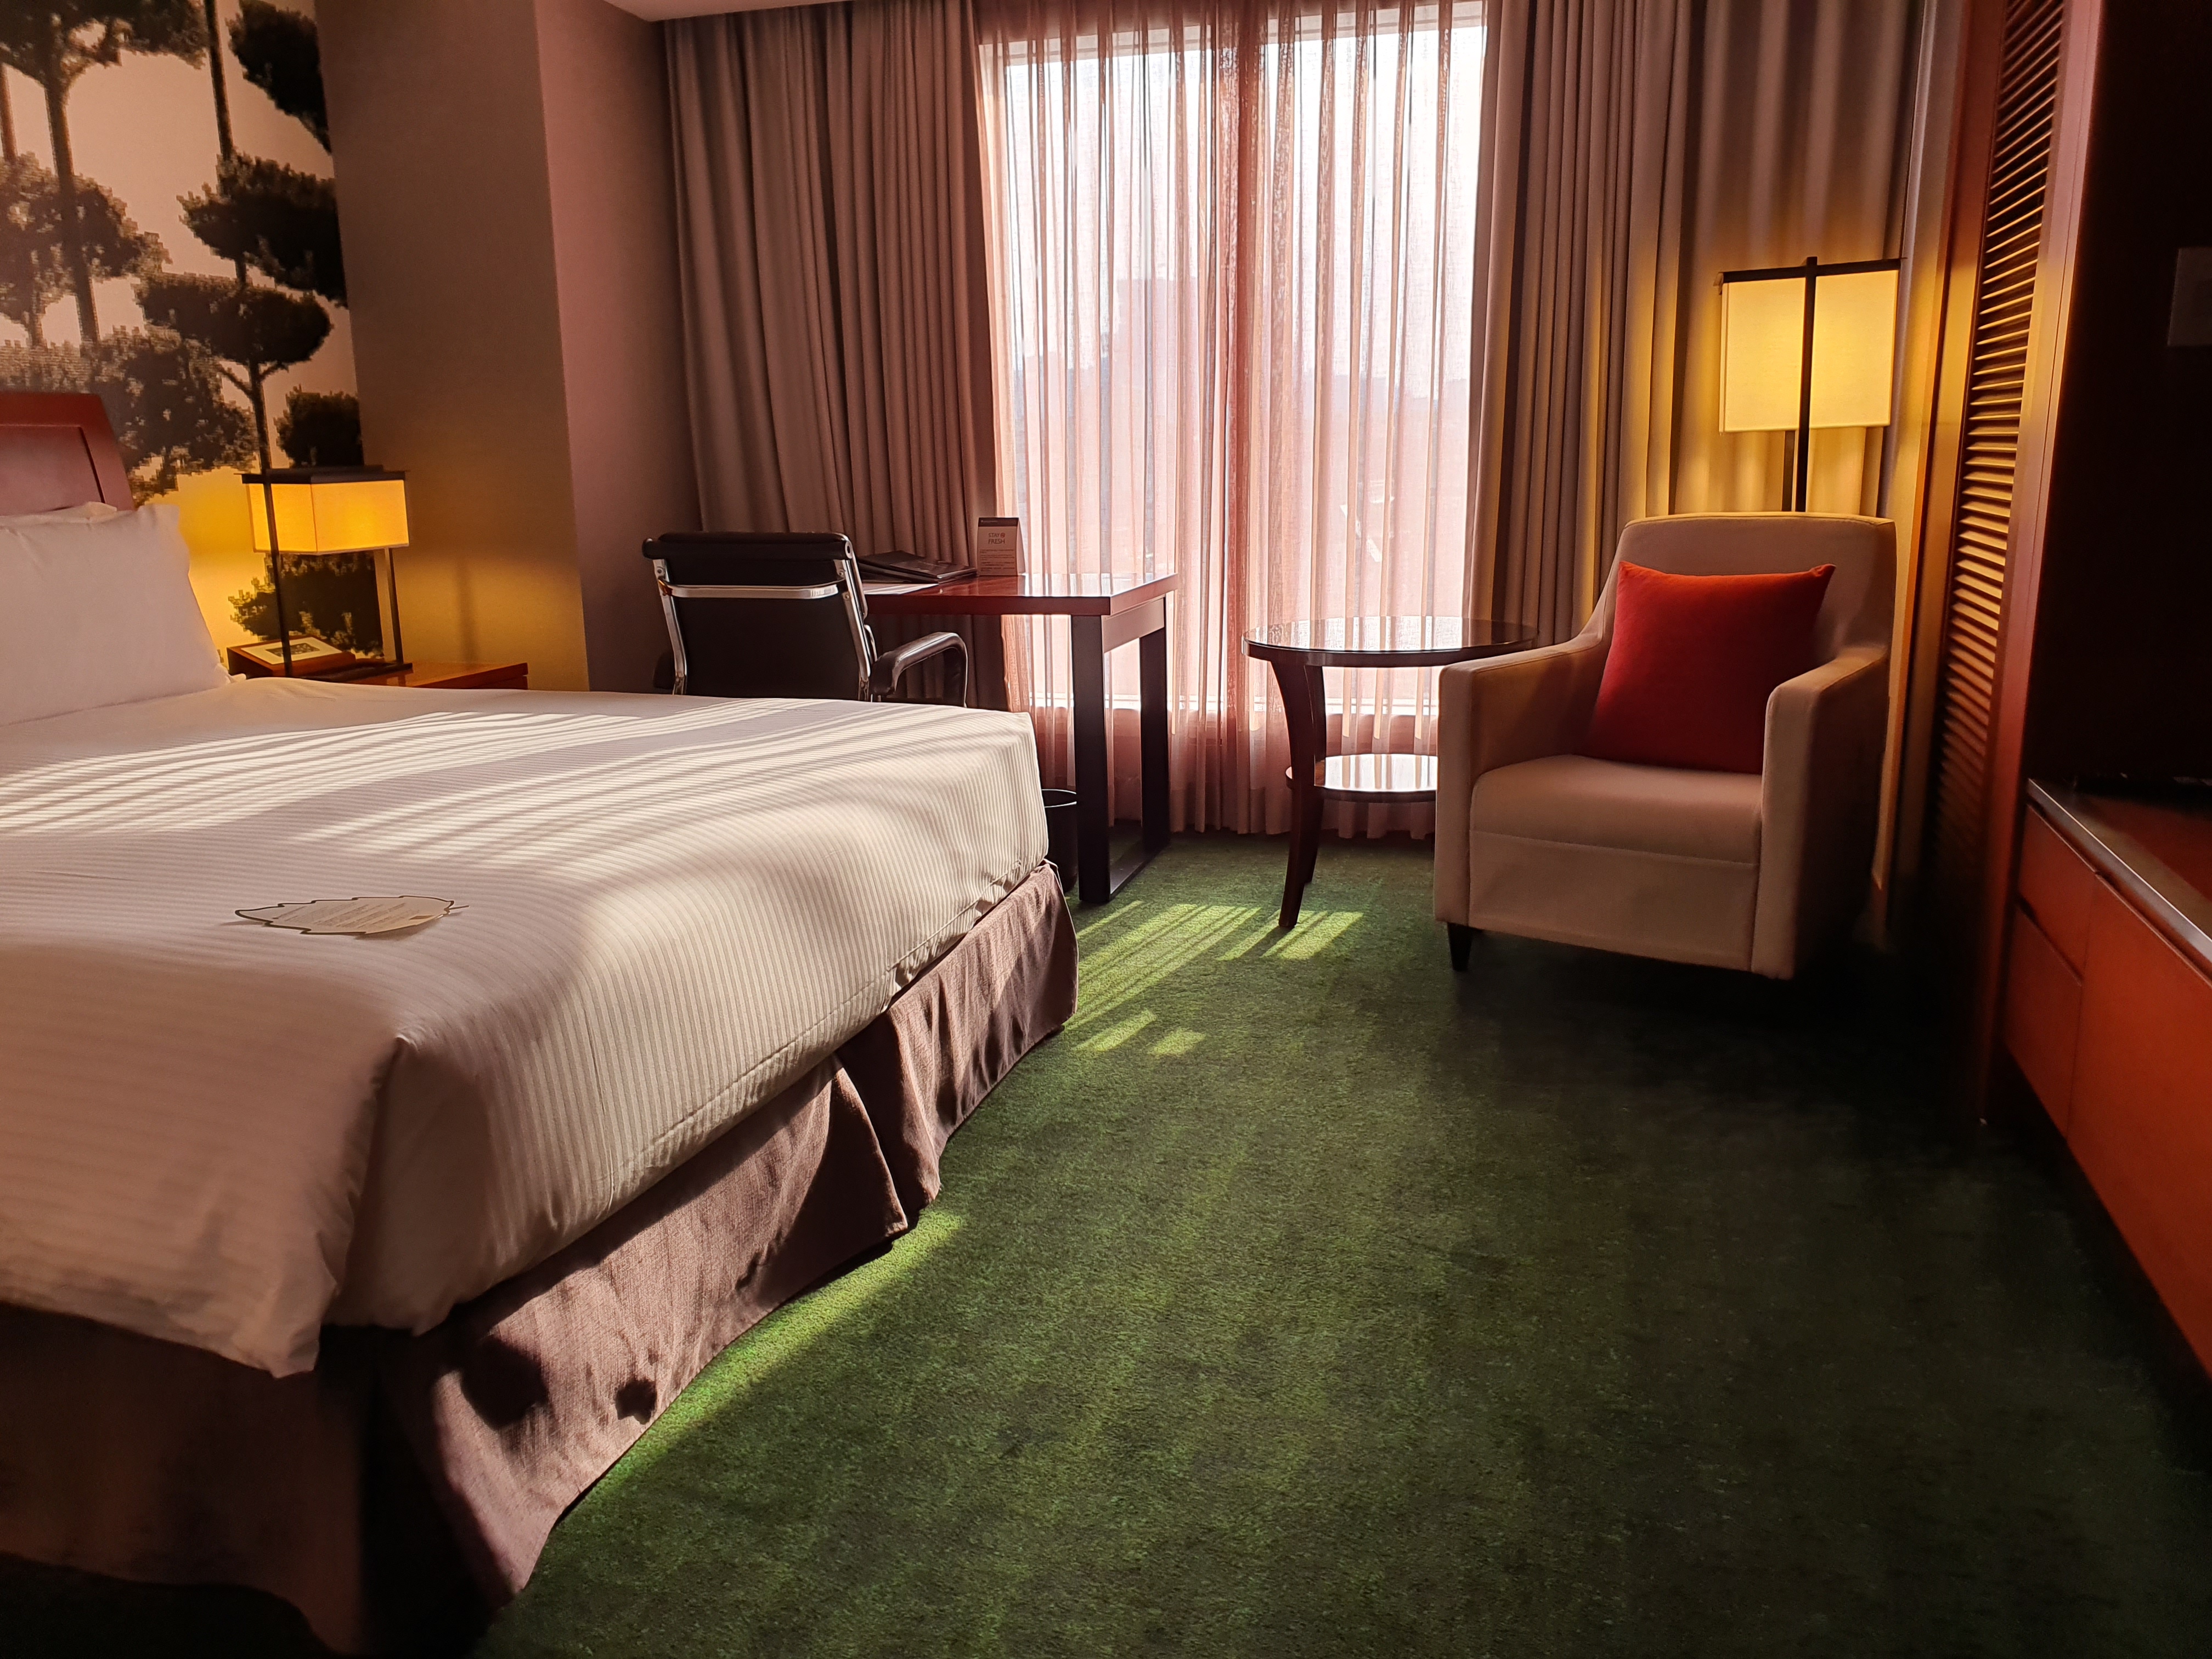 InterContinental Seoul COEX1 : Cozy room with carpet on the floor